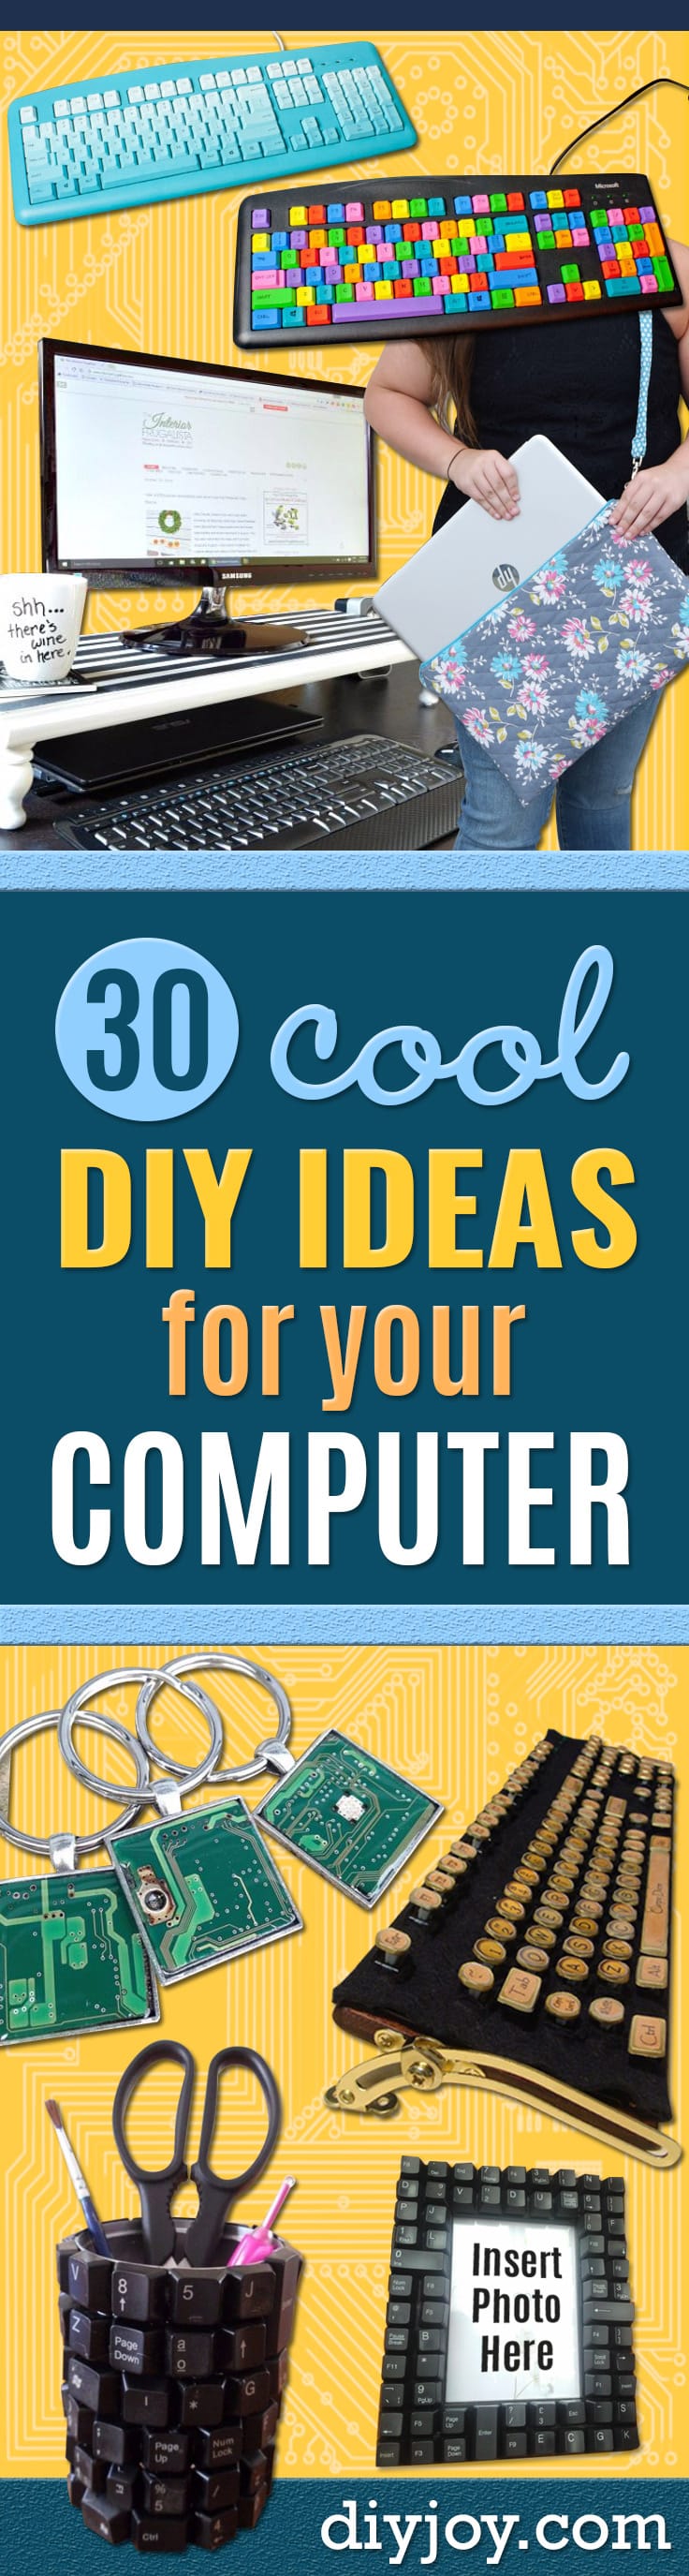 DIY Ideas for Your Computer - Cool Desk, Home Office, Bulletin Boards and Tech Projects for Kids, Awesome Tips and Tricks for Your Laptop and Desktop, Best Shortcuts and Neat Ways To Make Your Computer Even Better With Productivity Tips